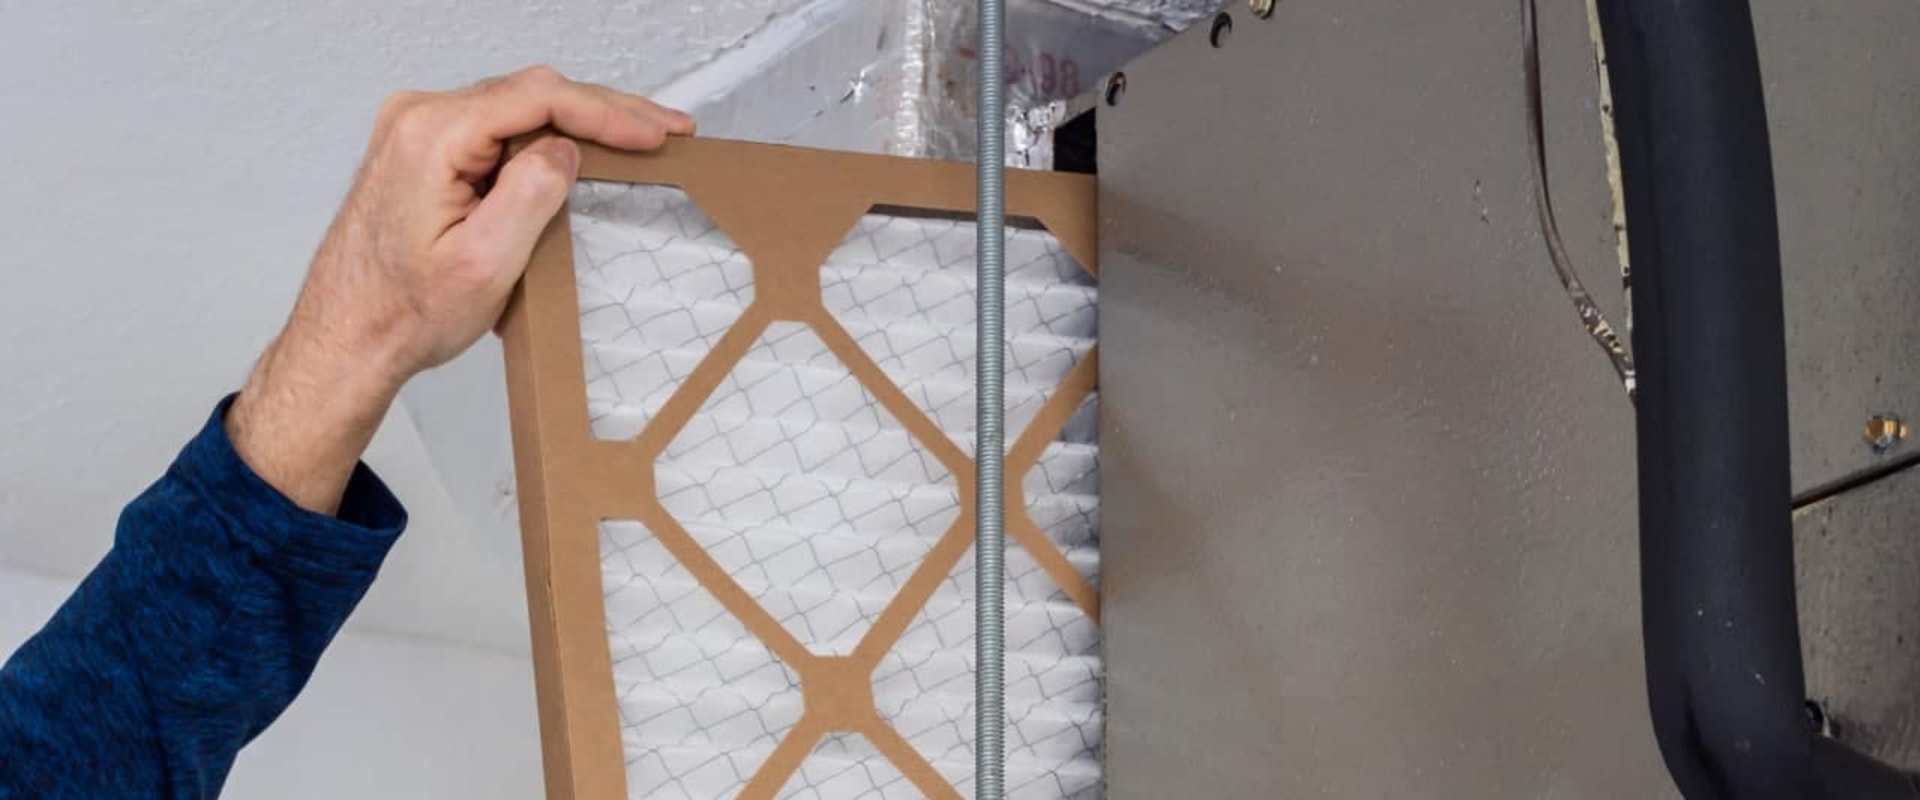 How Often Should You Change Your 20x20x4 Air Filter? - An Expert's Guide